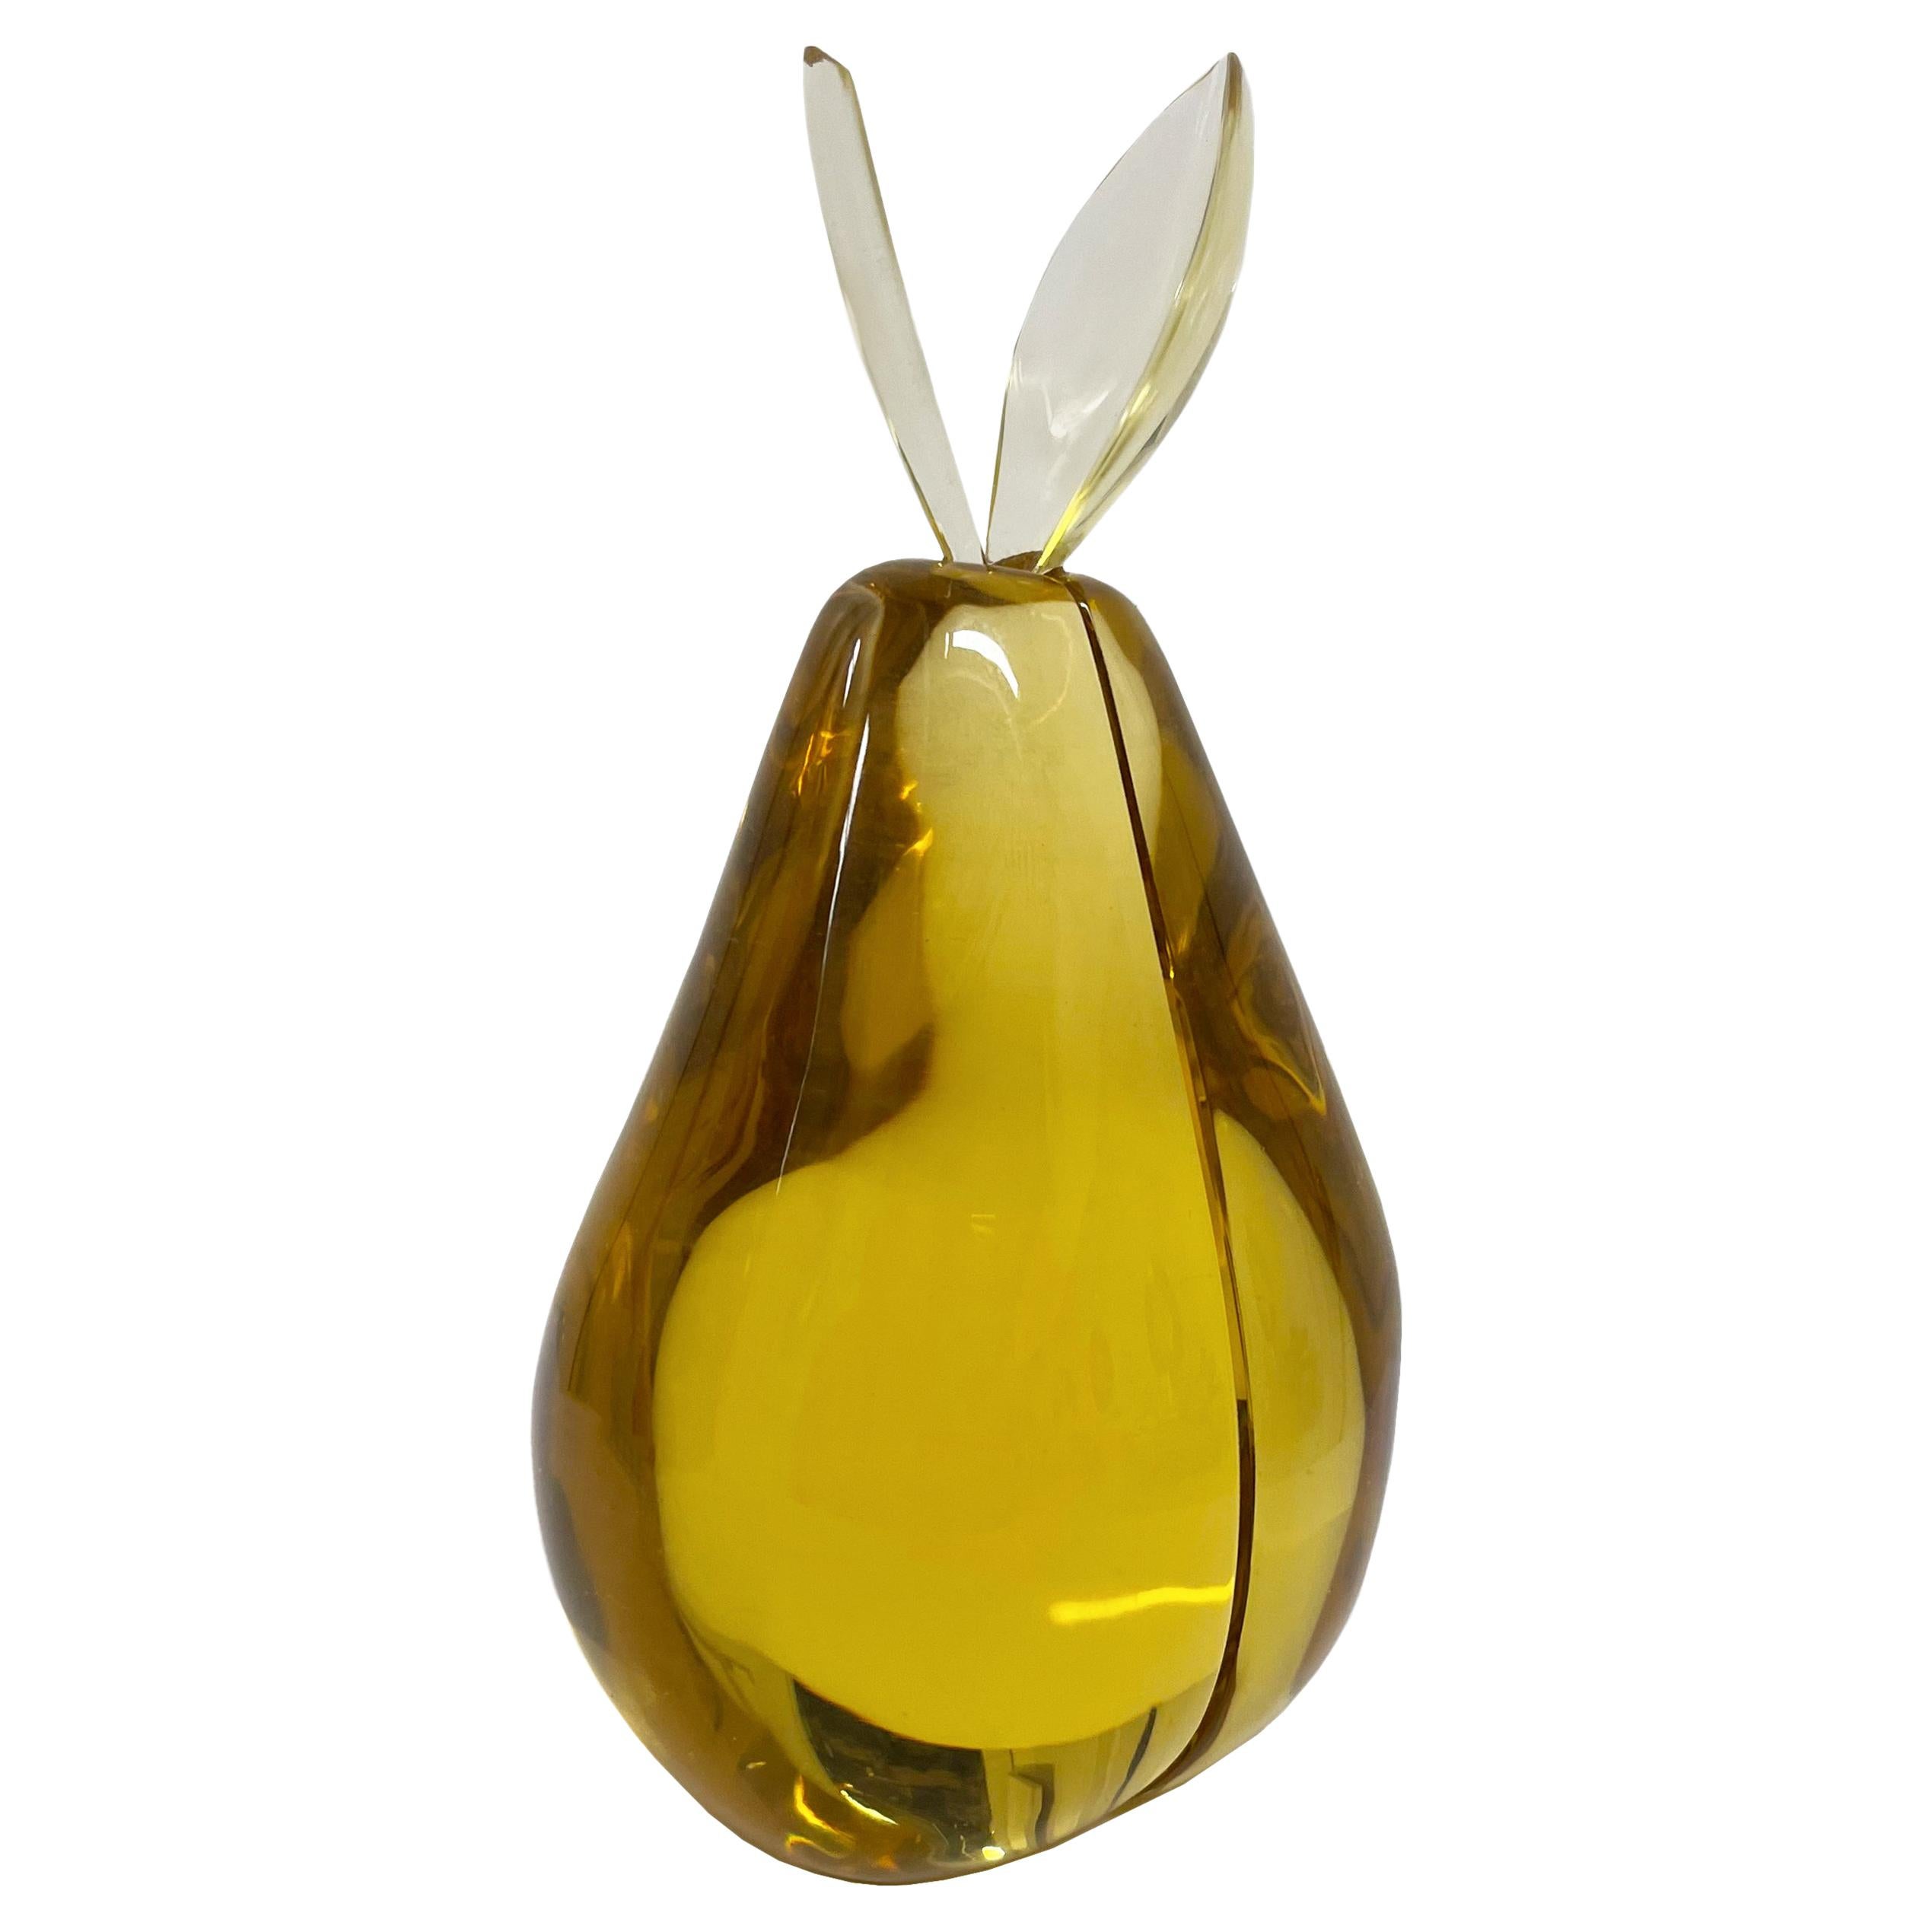 Contemporary 'Pear' Sculpture Amber Yellow Crystal Handcrafted by Ghirò Studio